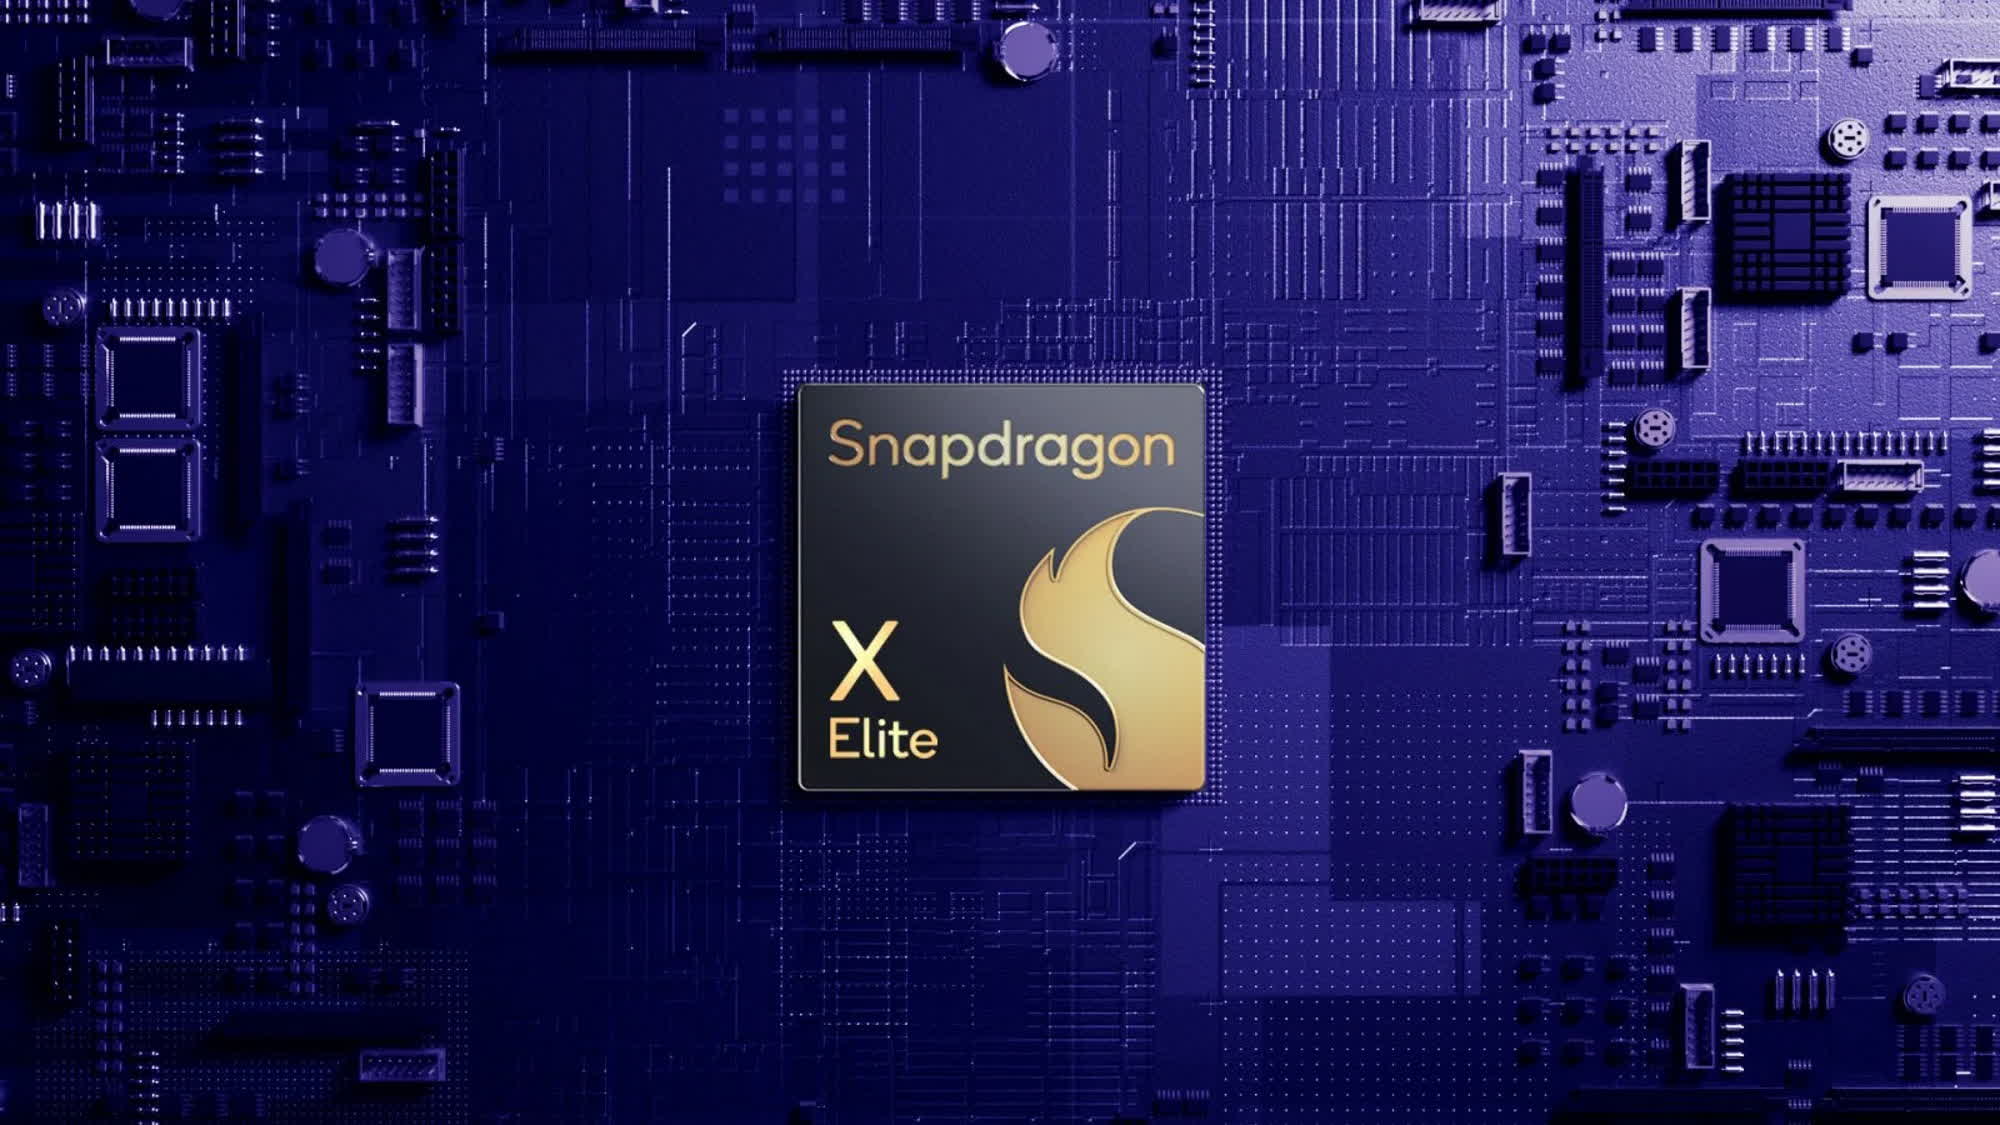 Qualcomm claims Snapdragon X Elite Arm SoC is faster than Apple's M3